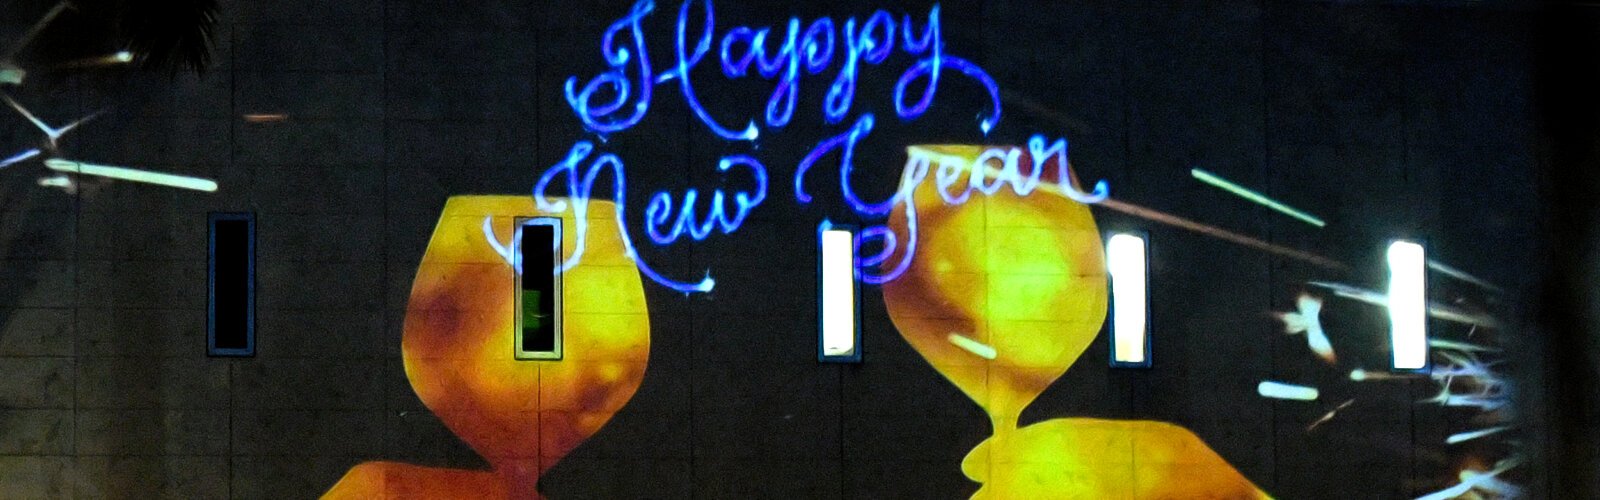 A message from digital decoration company FX Projections wishes the crowd a Happy New Year 2024 as the 30th annual First Night St Petersburg returns after a hiatus with a bigger than ever celebration of the arts.